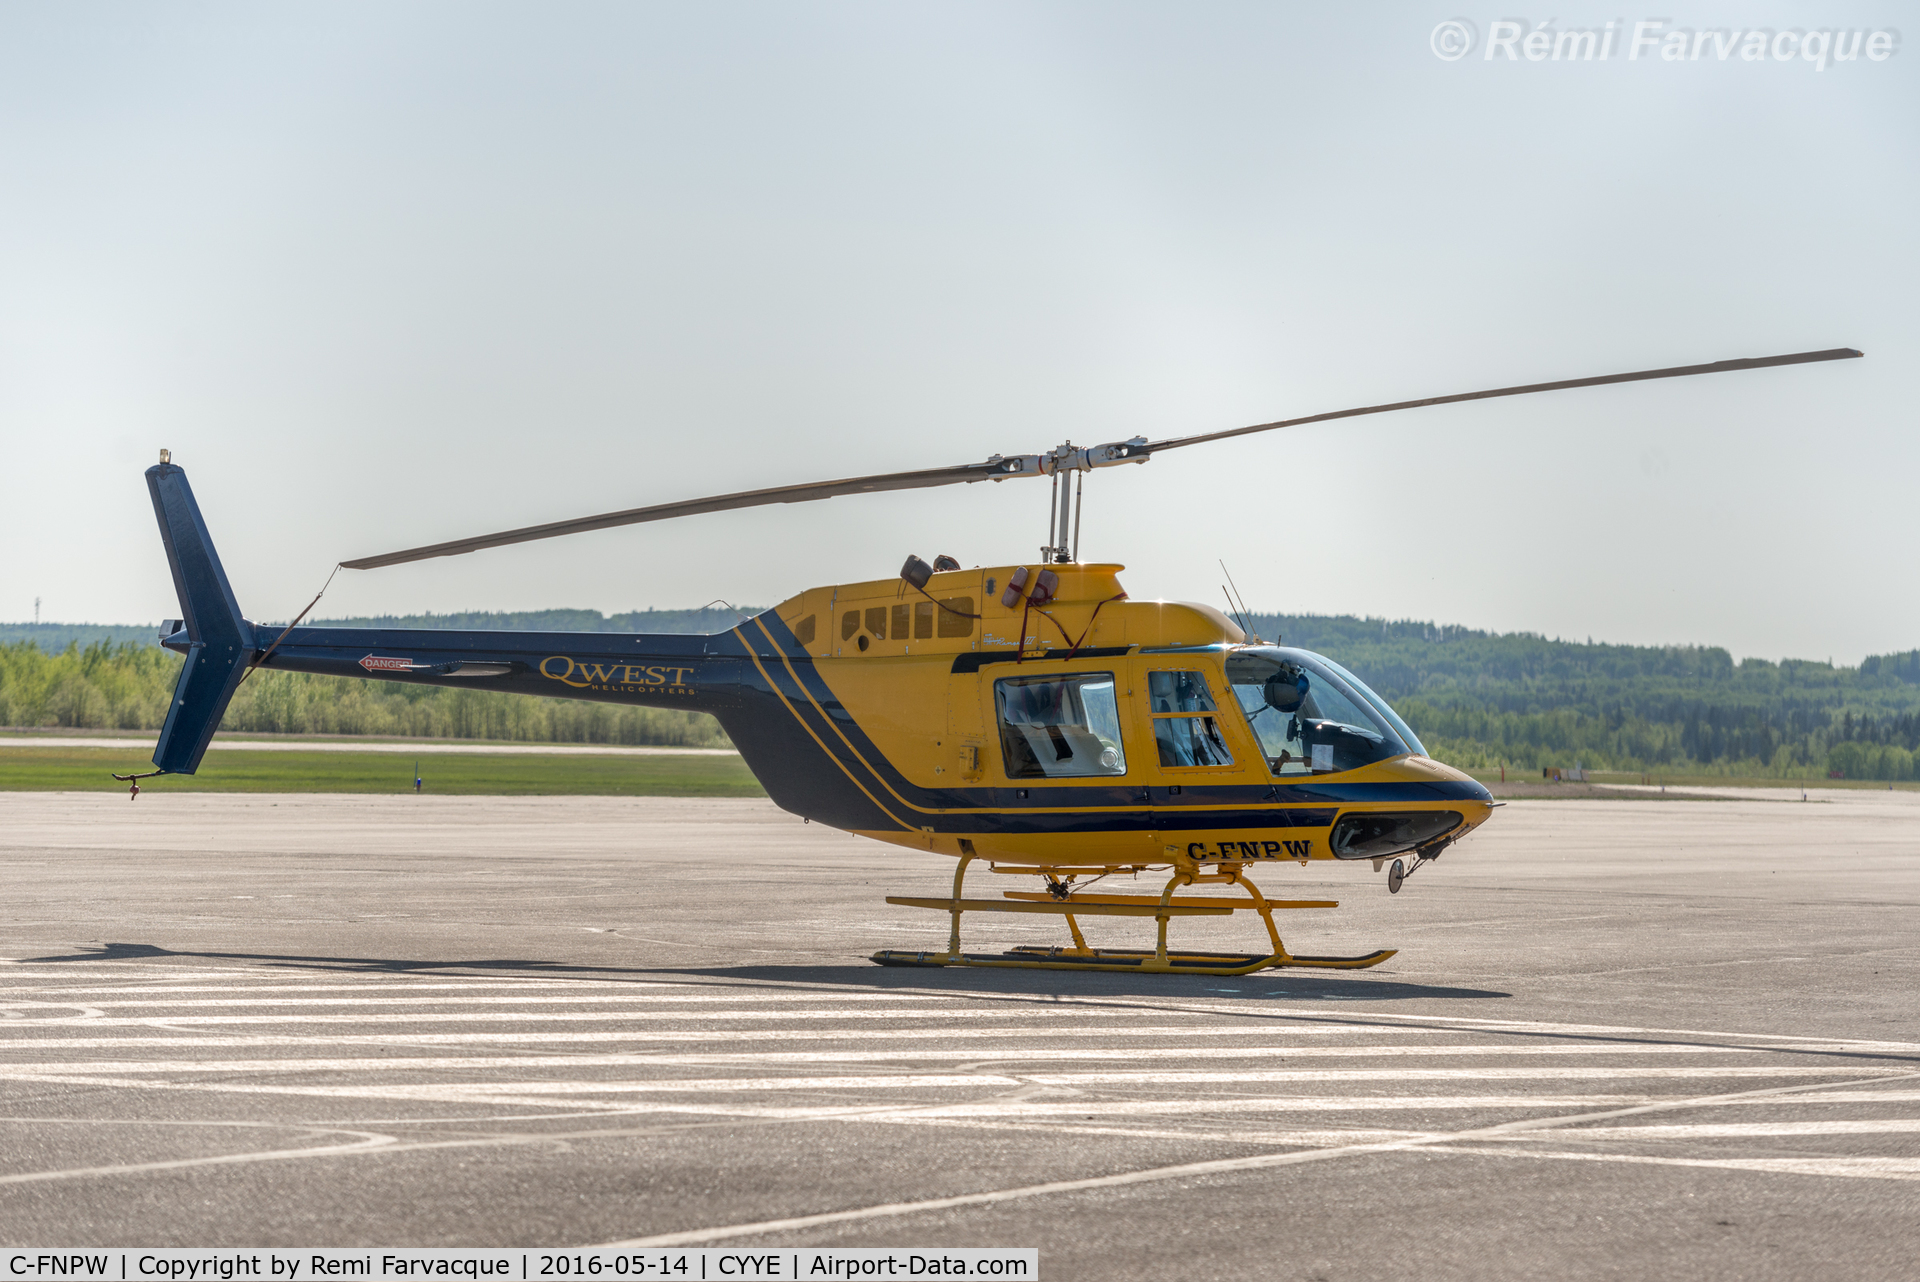 C-FNPW, 1975 Bell 206B JetRanger II C/N 1690, Parked outside Qwest Helicopters hangar.